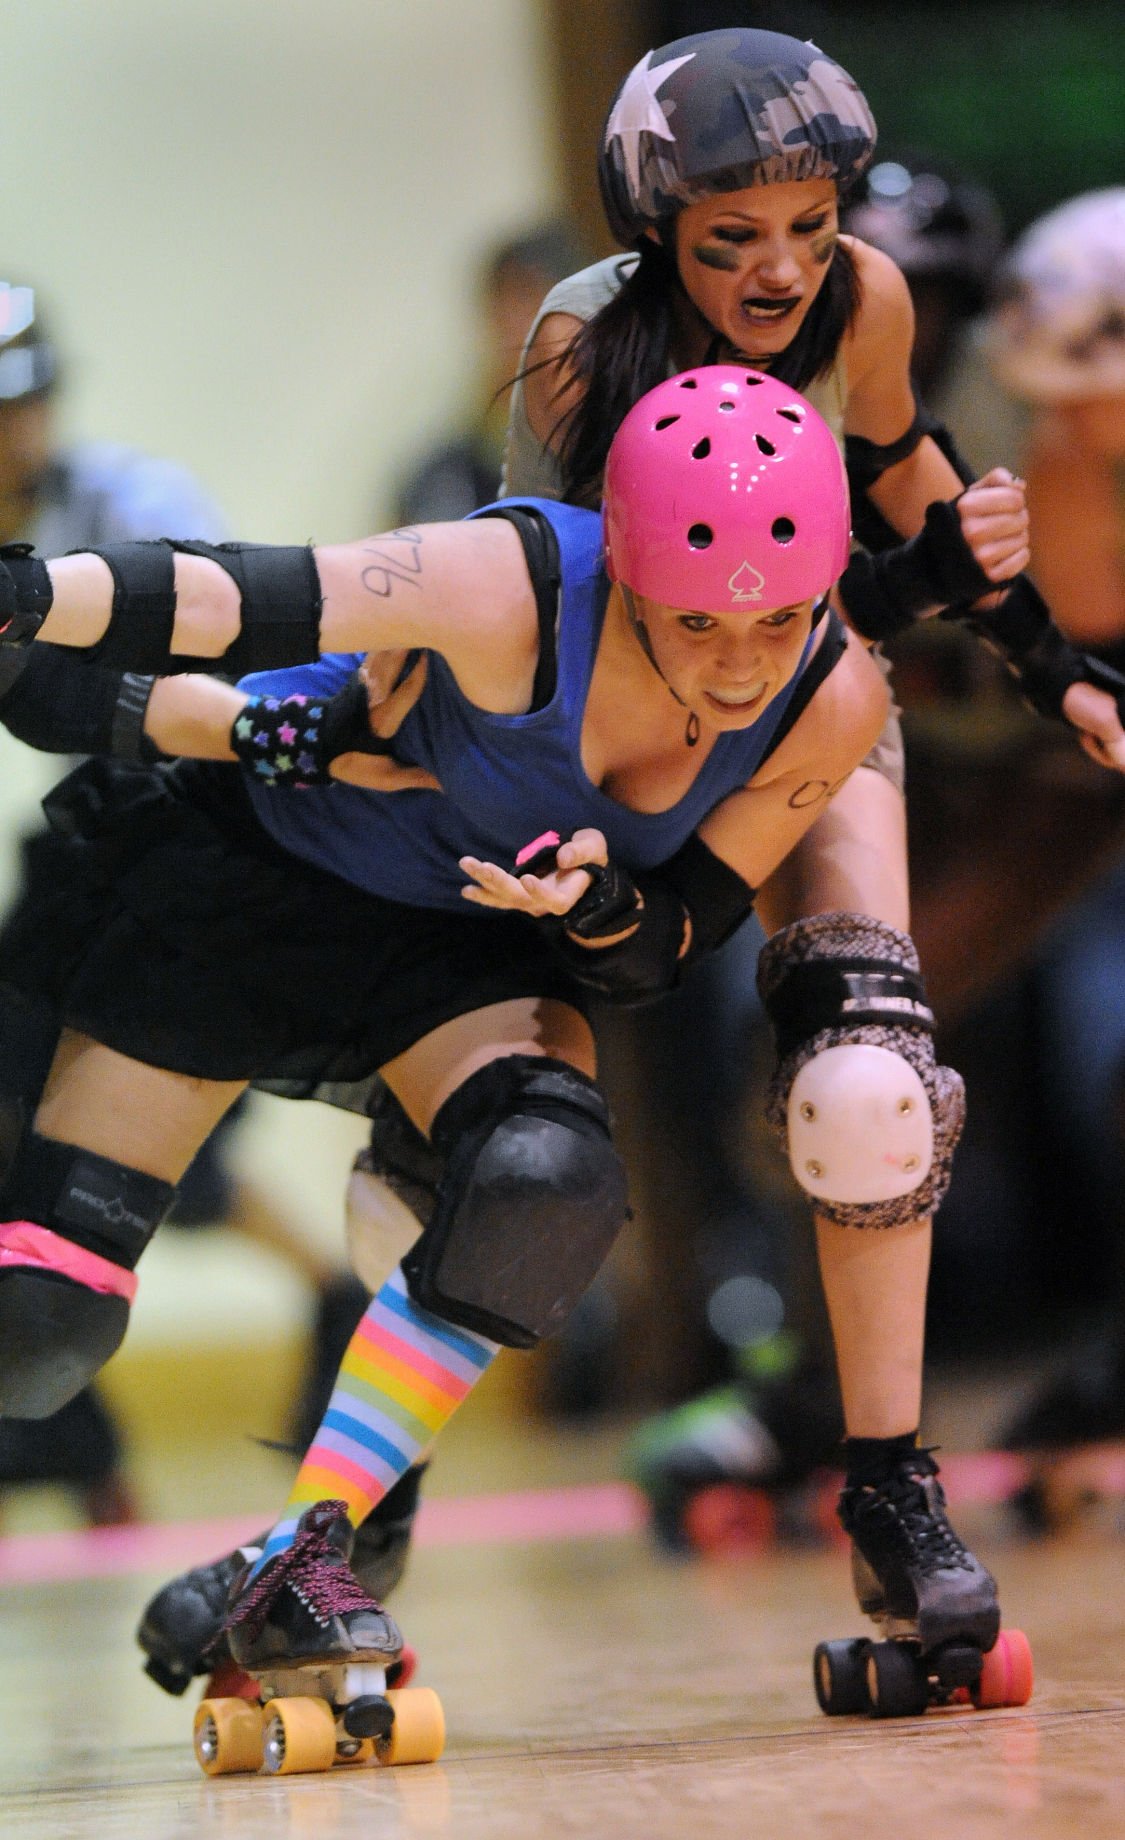 Roller derby resurgence: How America's forgotten pastime remains on track, Lifestyle